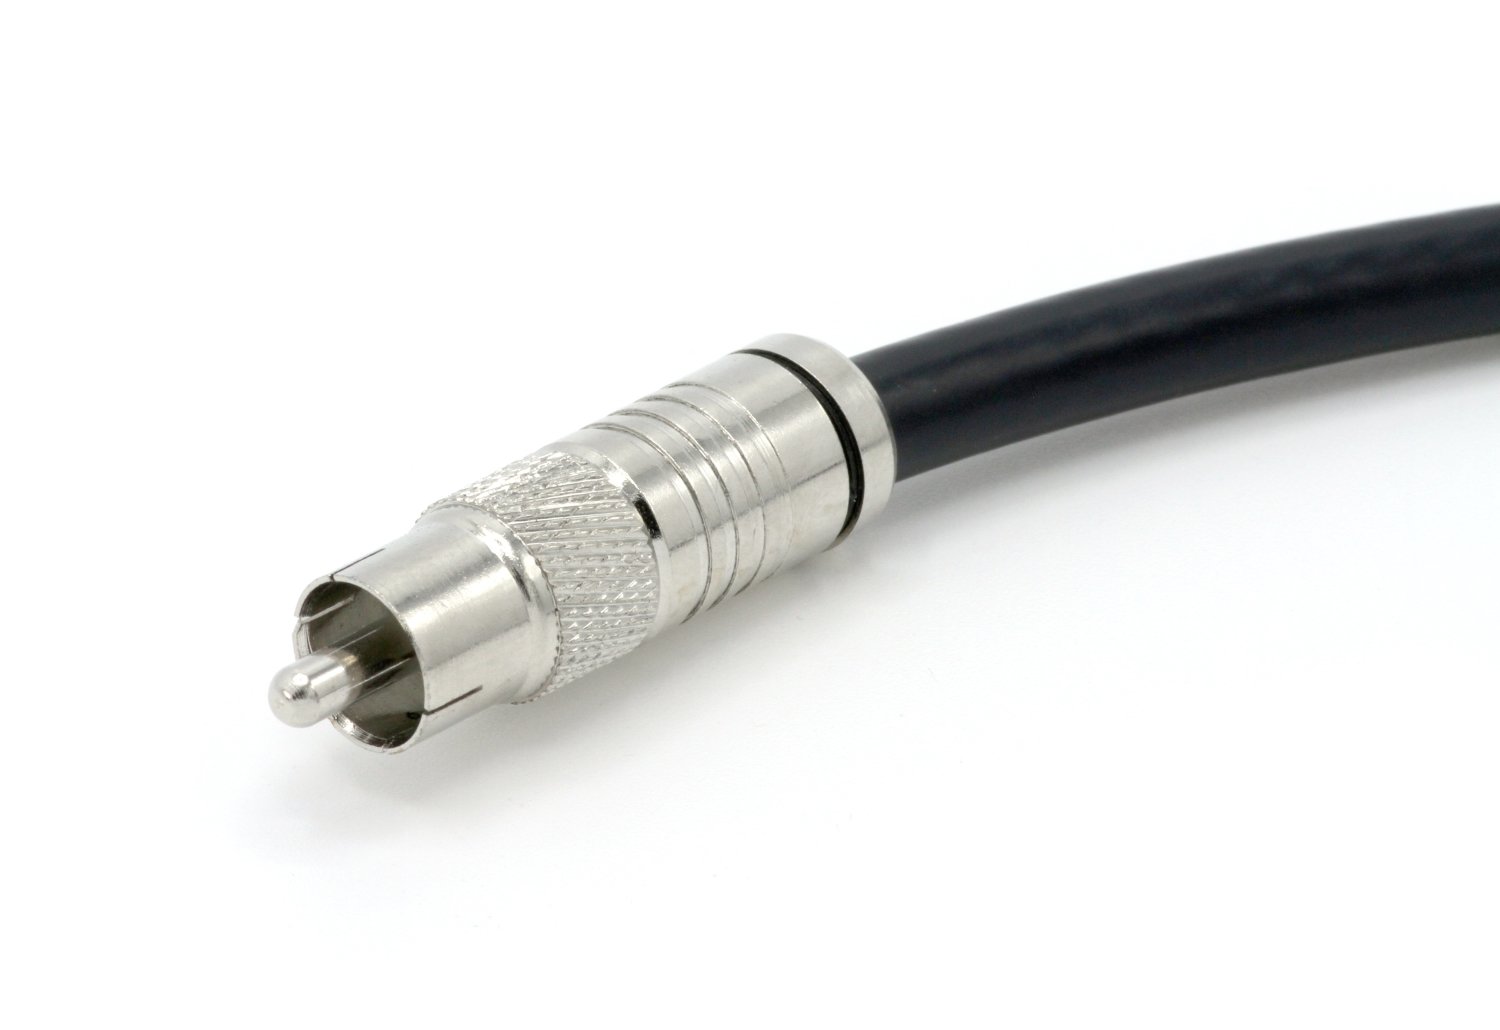 The Cimple Co Digital Audio Coaxial Cable | Subwoofer Cable – (S/PDIF) RCA Cable, 75 Feet